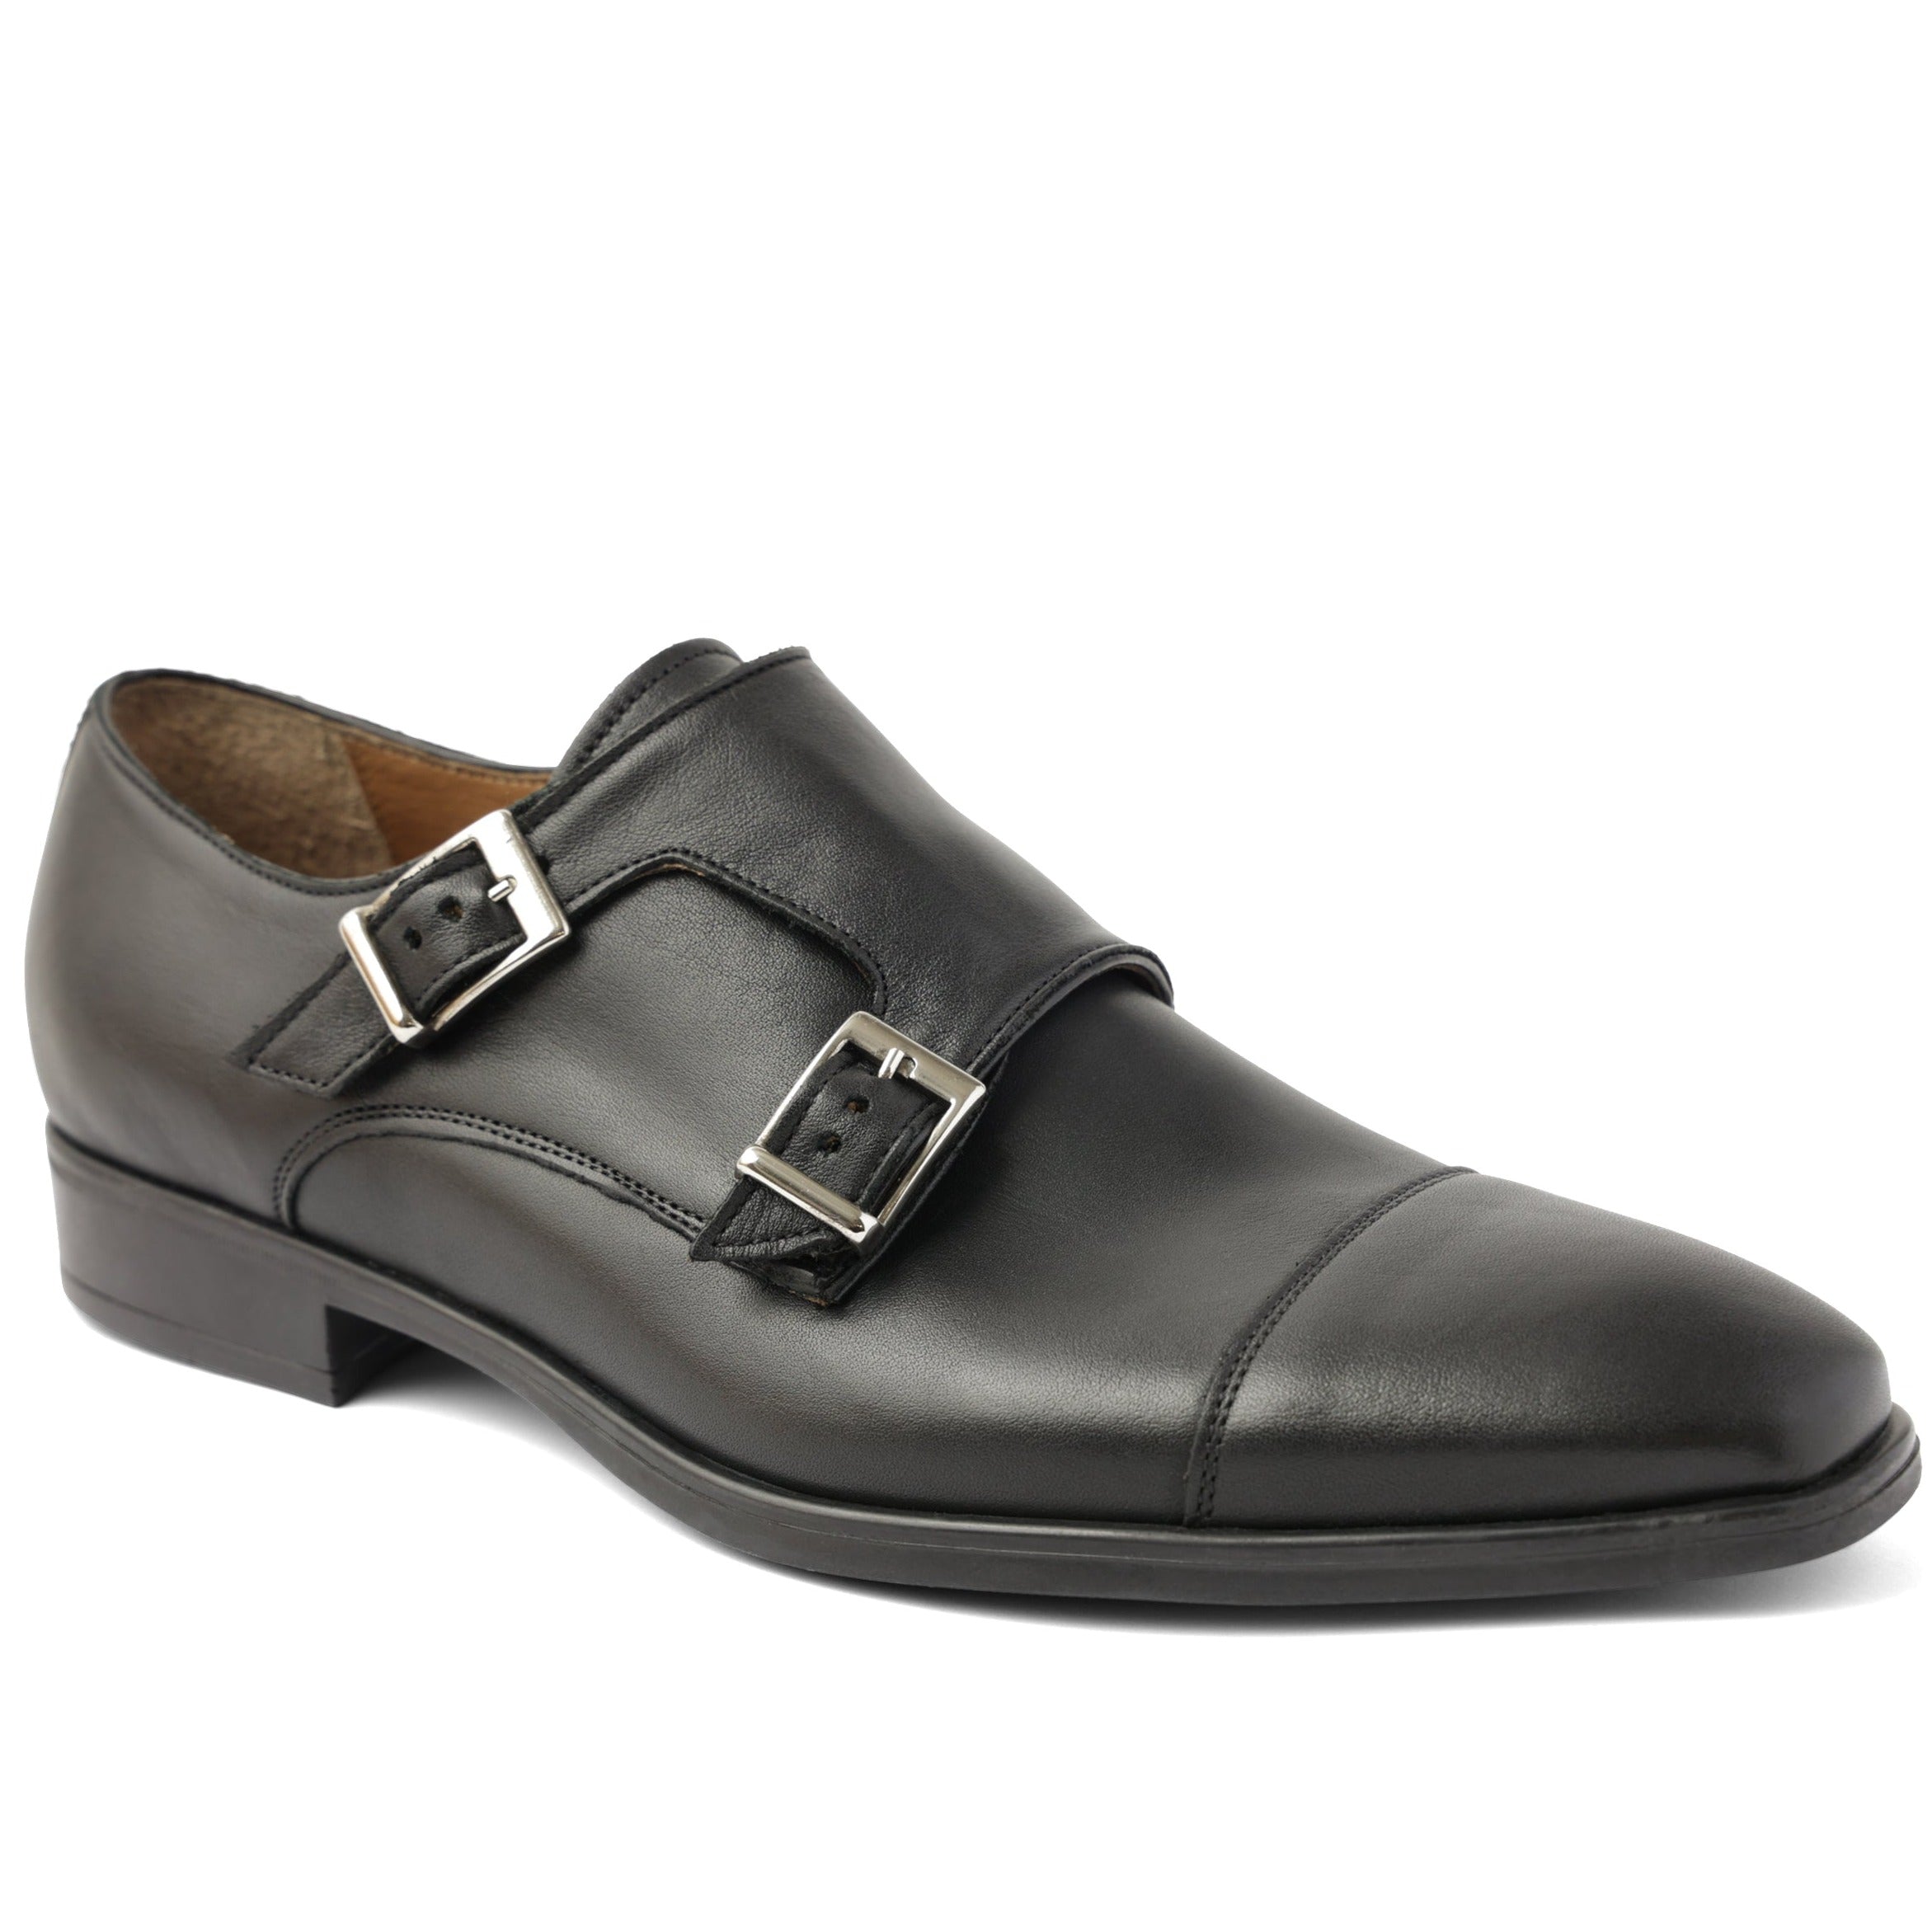 Image of Soldo Tailored Leather Buckle Shoe - Black Calf